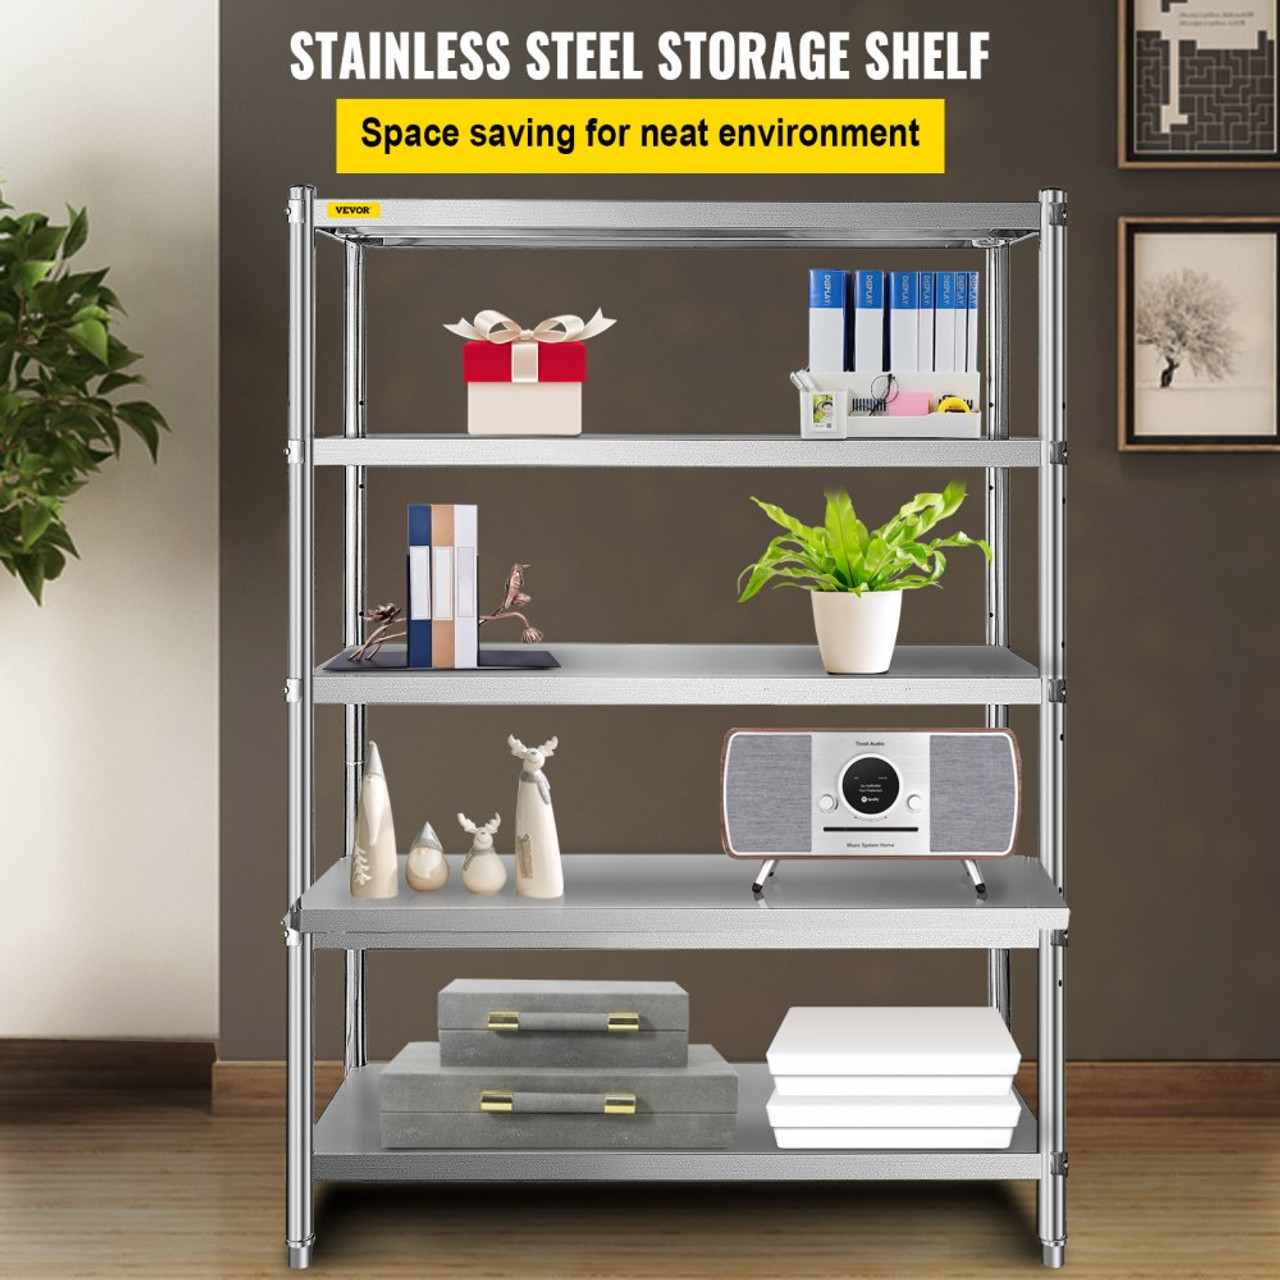 Storage Rack, 5 Tier Shelf Adjustable Stainless Steel Shelves, Sturdy Metal Shelves Heavy Duty Shelving Units and Storage for Kitchen Commercial